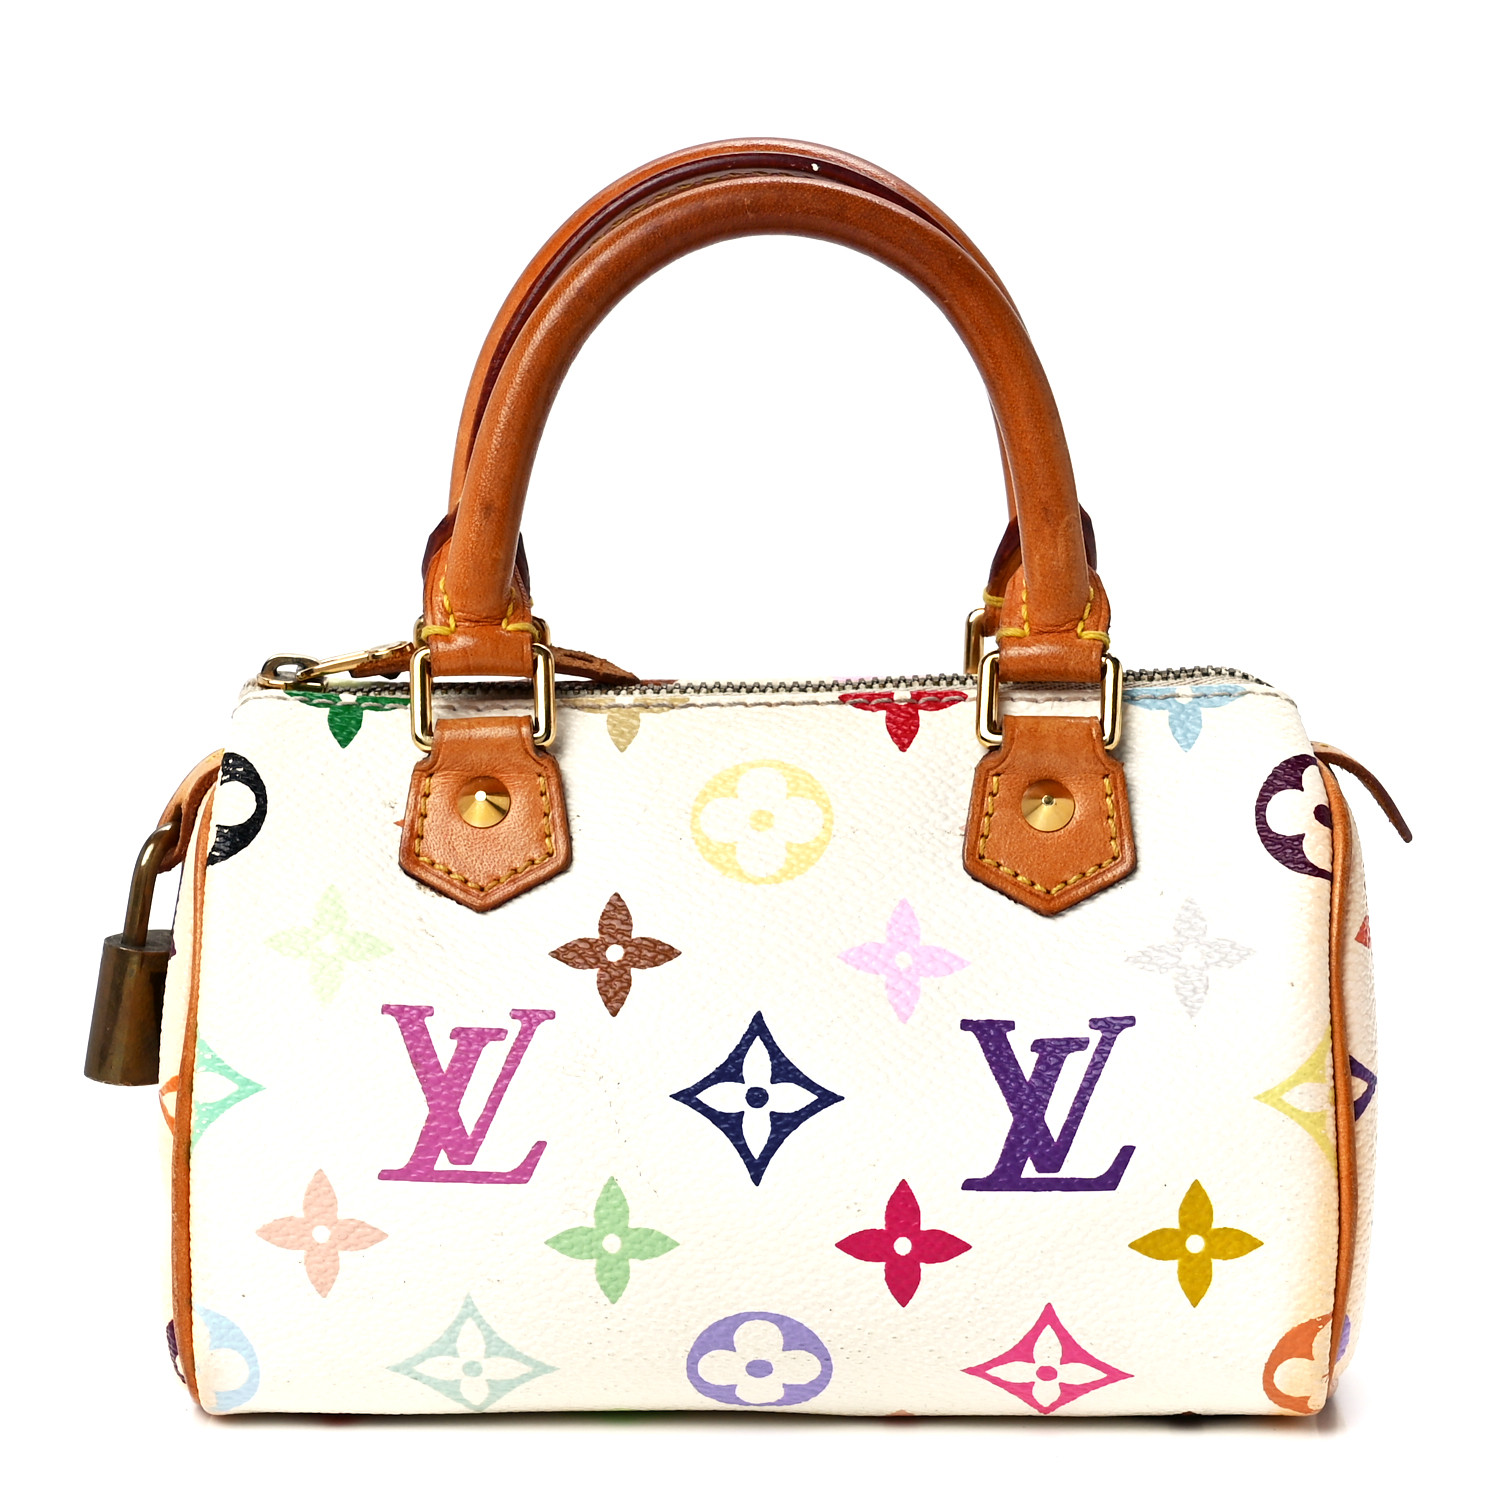 Louis Vuitton's Iconic Speedy Gets a Mini Makeover for Spring 2020